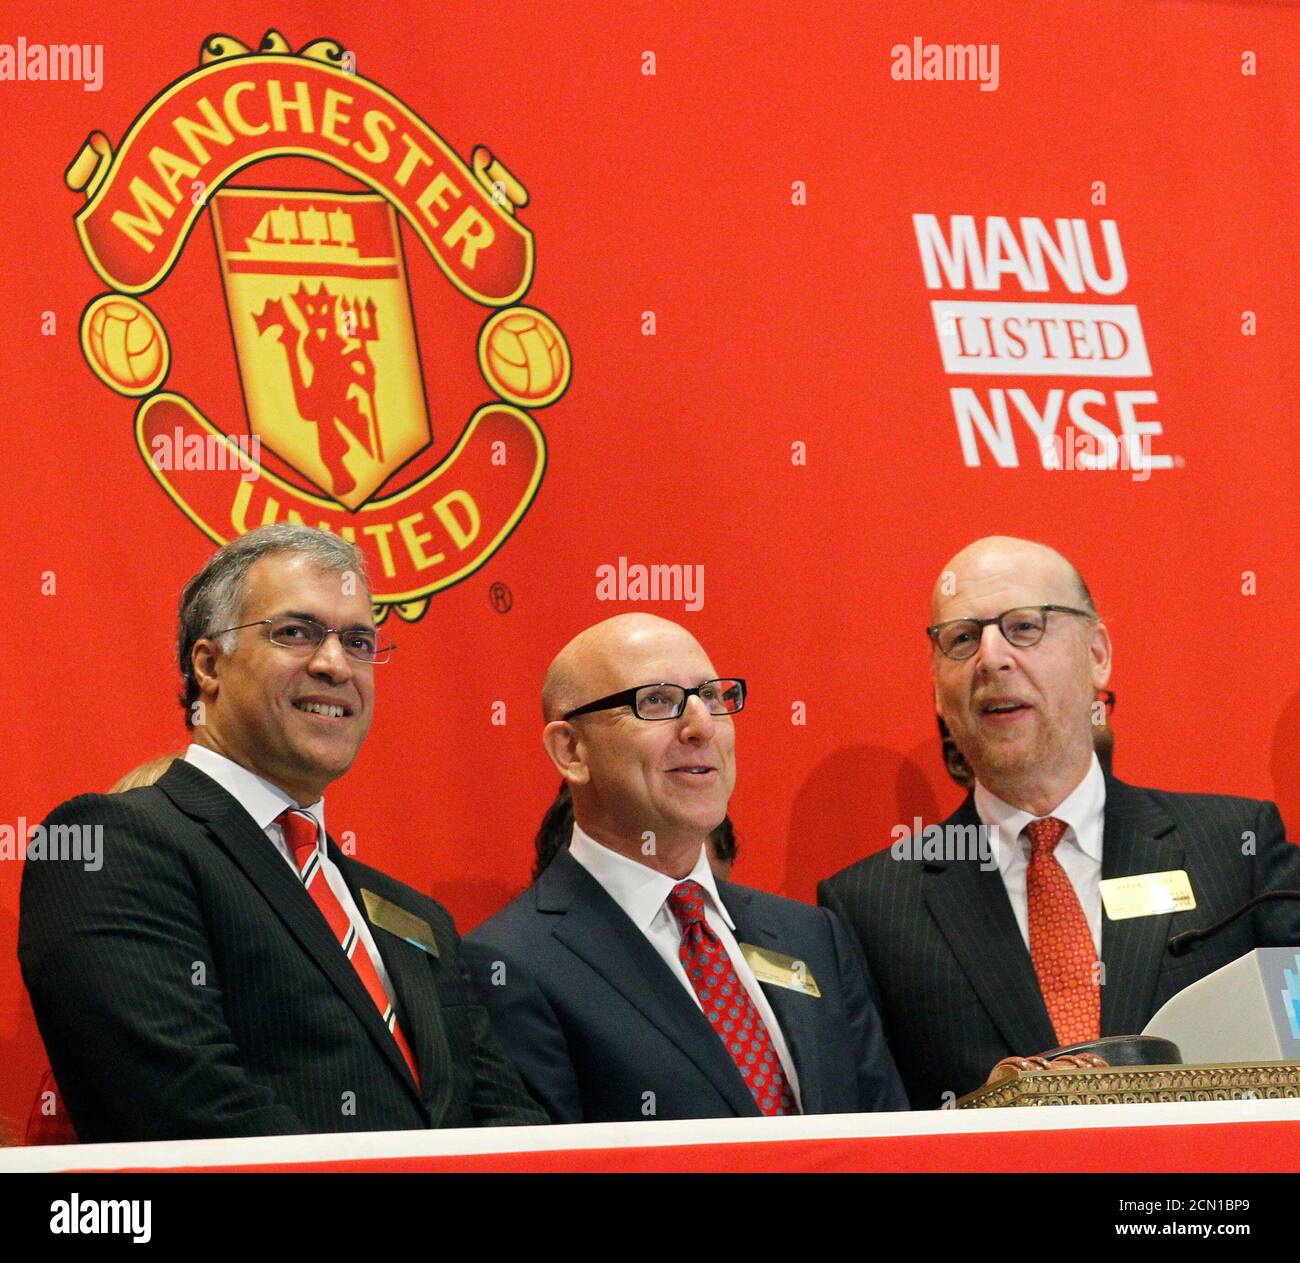 (L - R)Manchester United Chief Operating Officer (COO) Michael Bolingbroke and owners Joel and Avram Glazer ring the opening bell in celebration of Manchester United Ltd initial public offering on the floor of the New York Stock Exchange, August 10, 2012. Shares in Manchester United priced below expectations and were essentially flat in early trading on Friday, a disappointing stock market debut for the world's most famous soccer club and most valuable sporting team.REUTERS/Brendan McDermid (UNITED STATES - Tags: BUSINESS SPORT SOCCER) Stock Photo